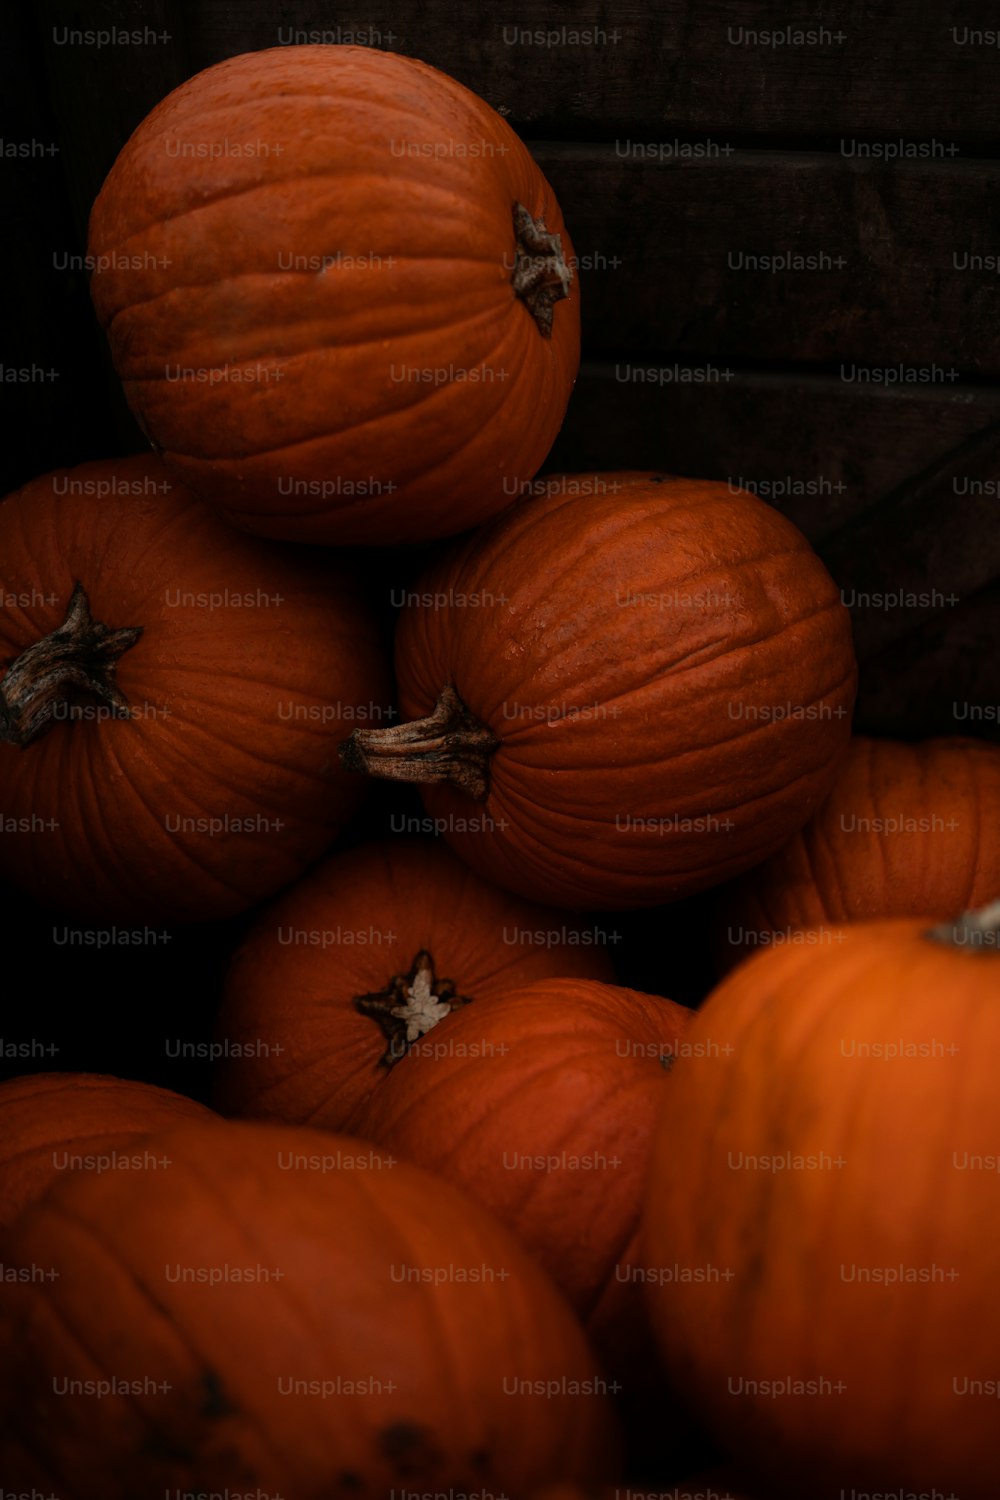 a pile of pumpkins sitting on top of each other